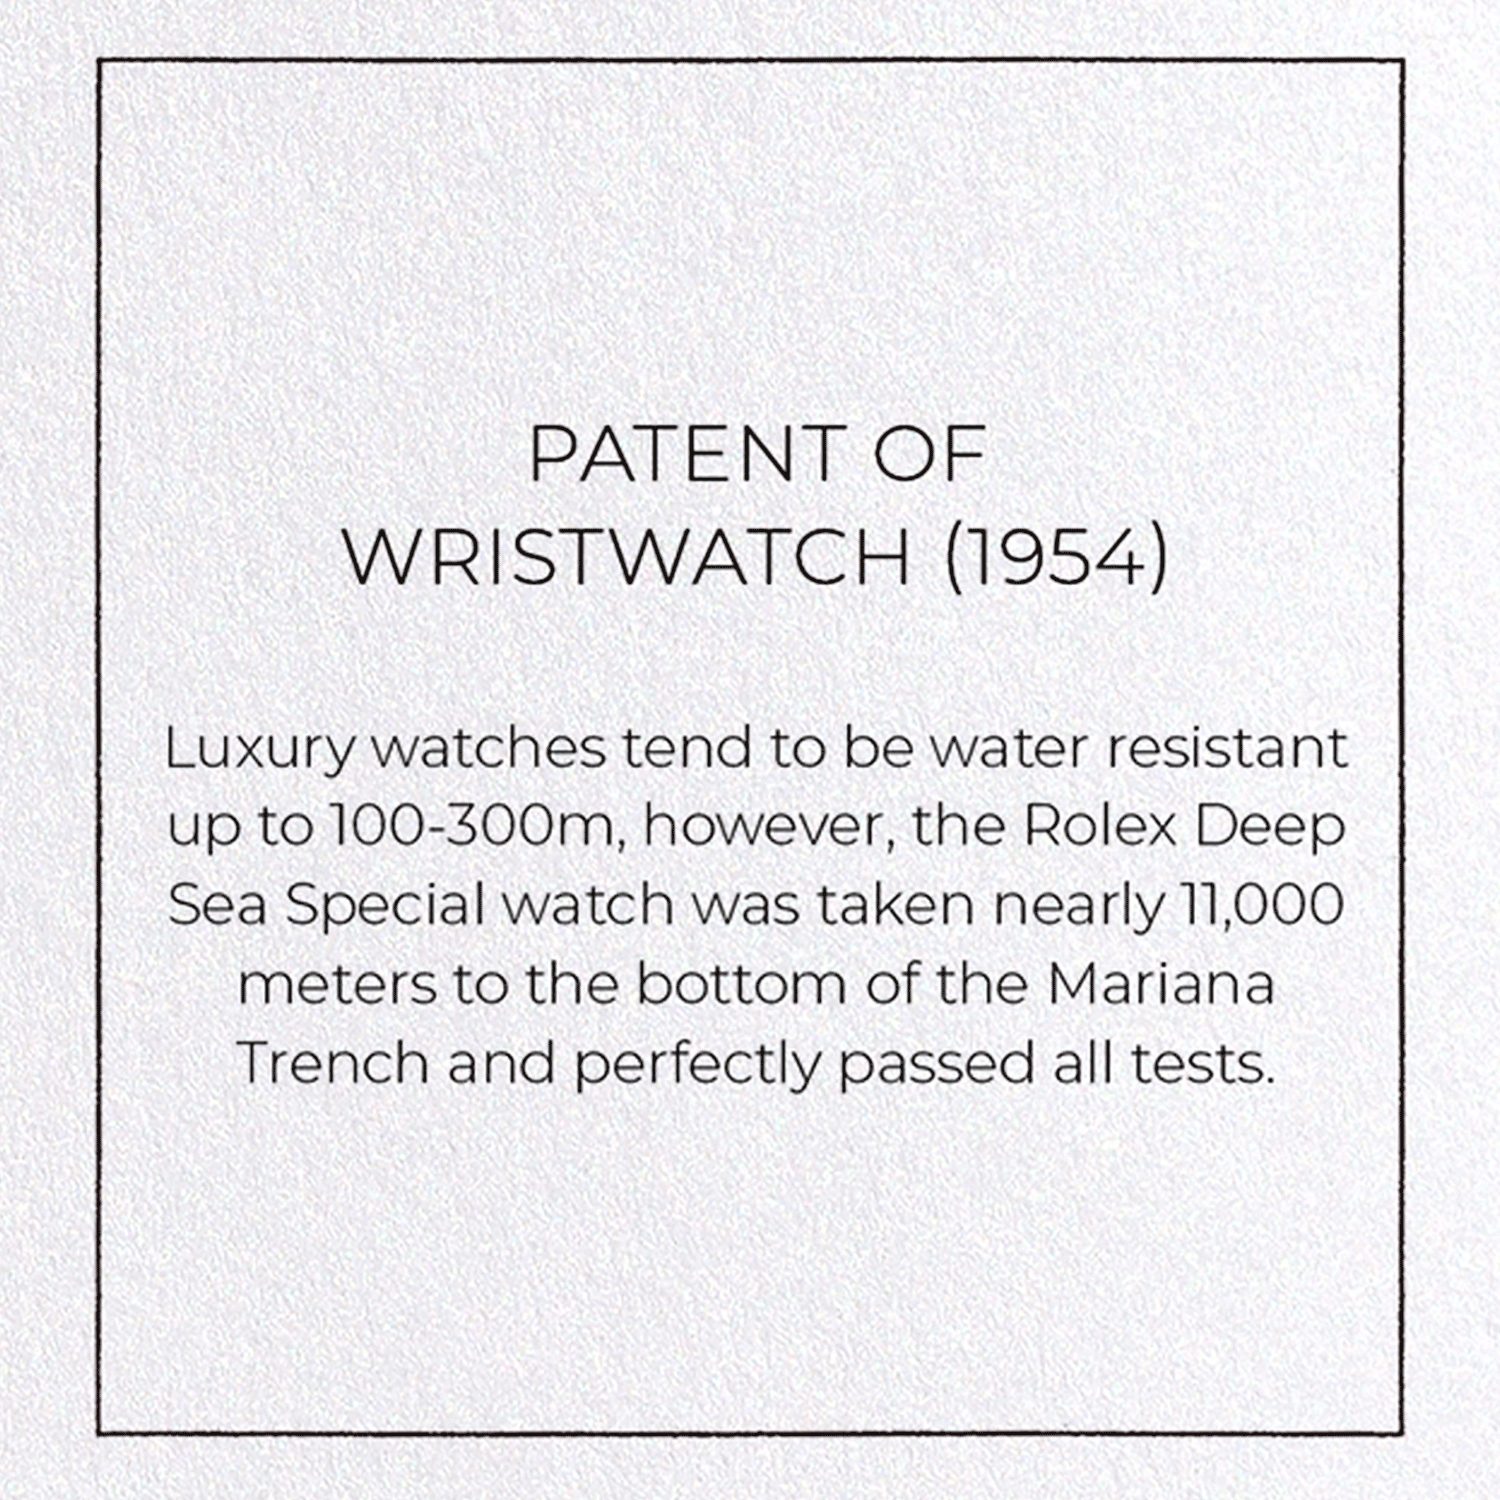 PATENT OF WRISTWATCH (1954): Patent Greeting Card